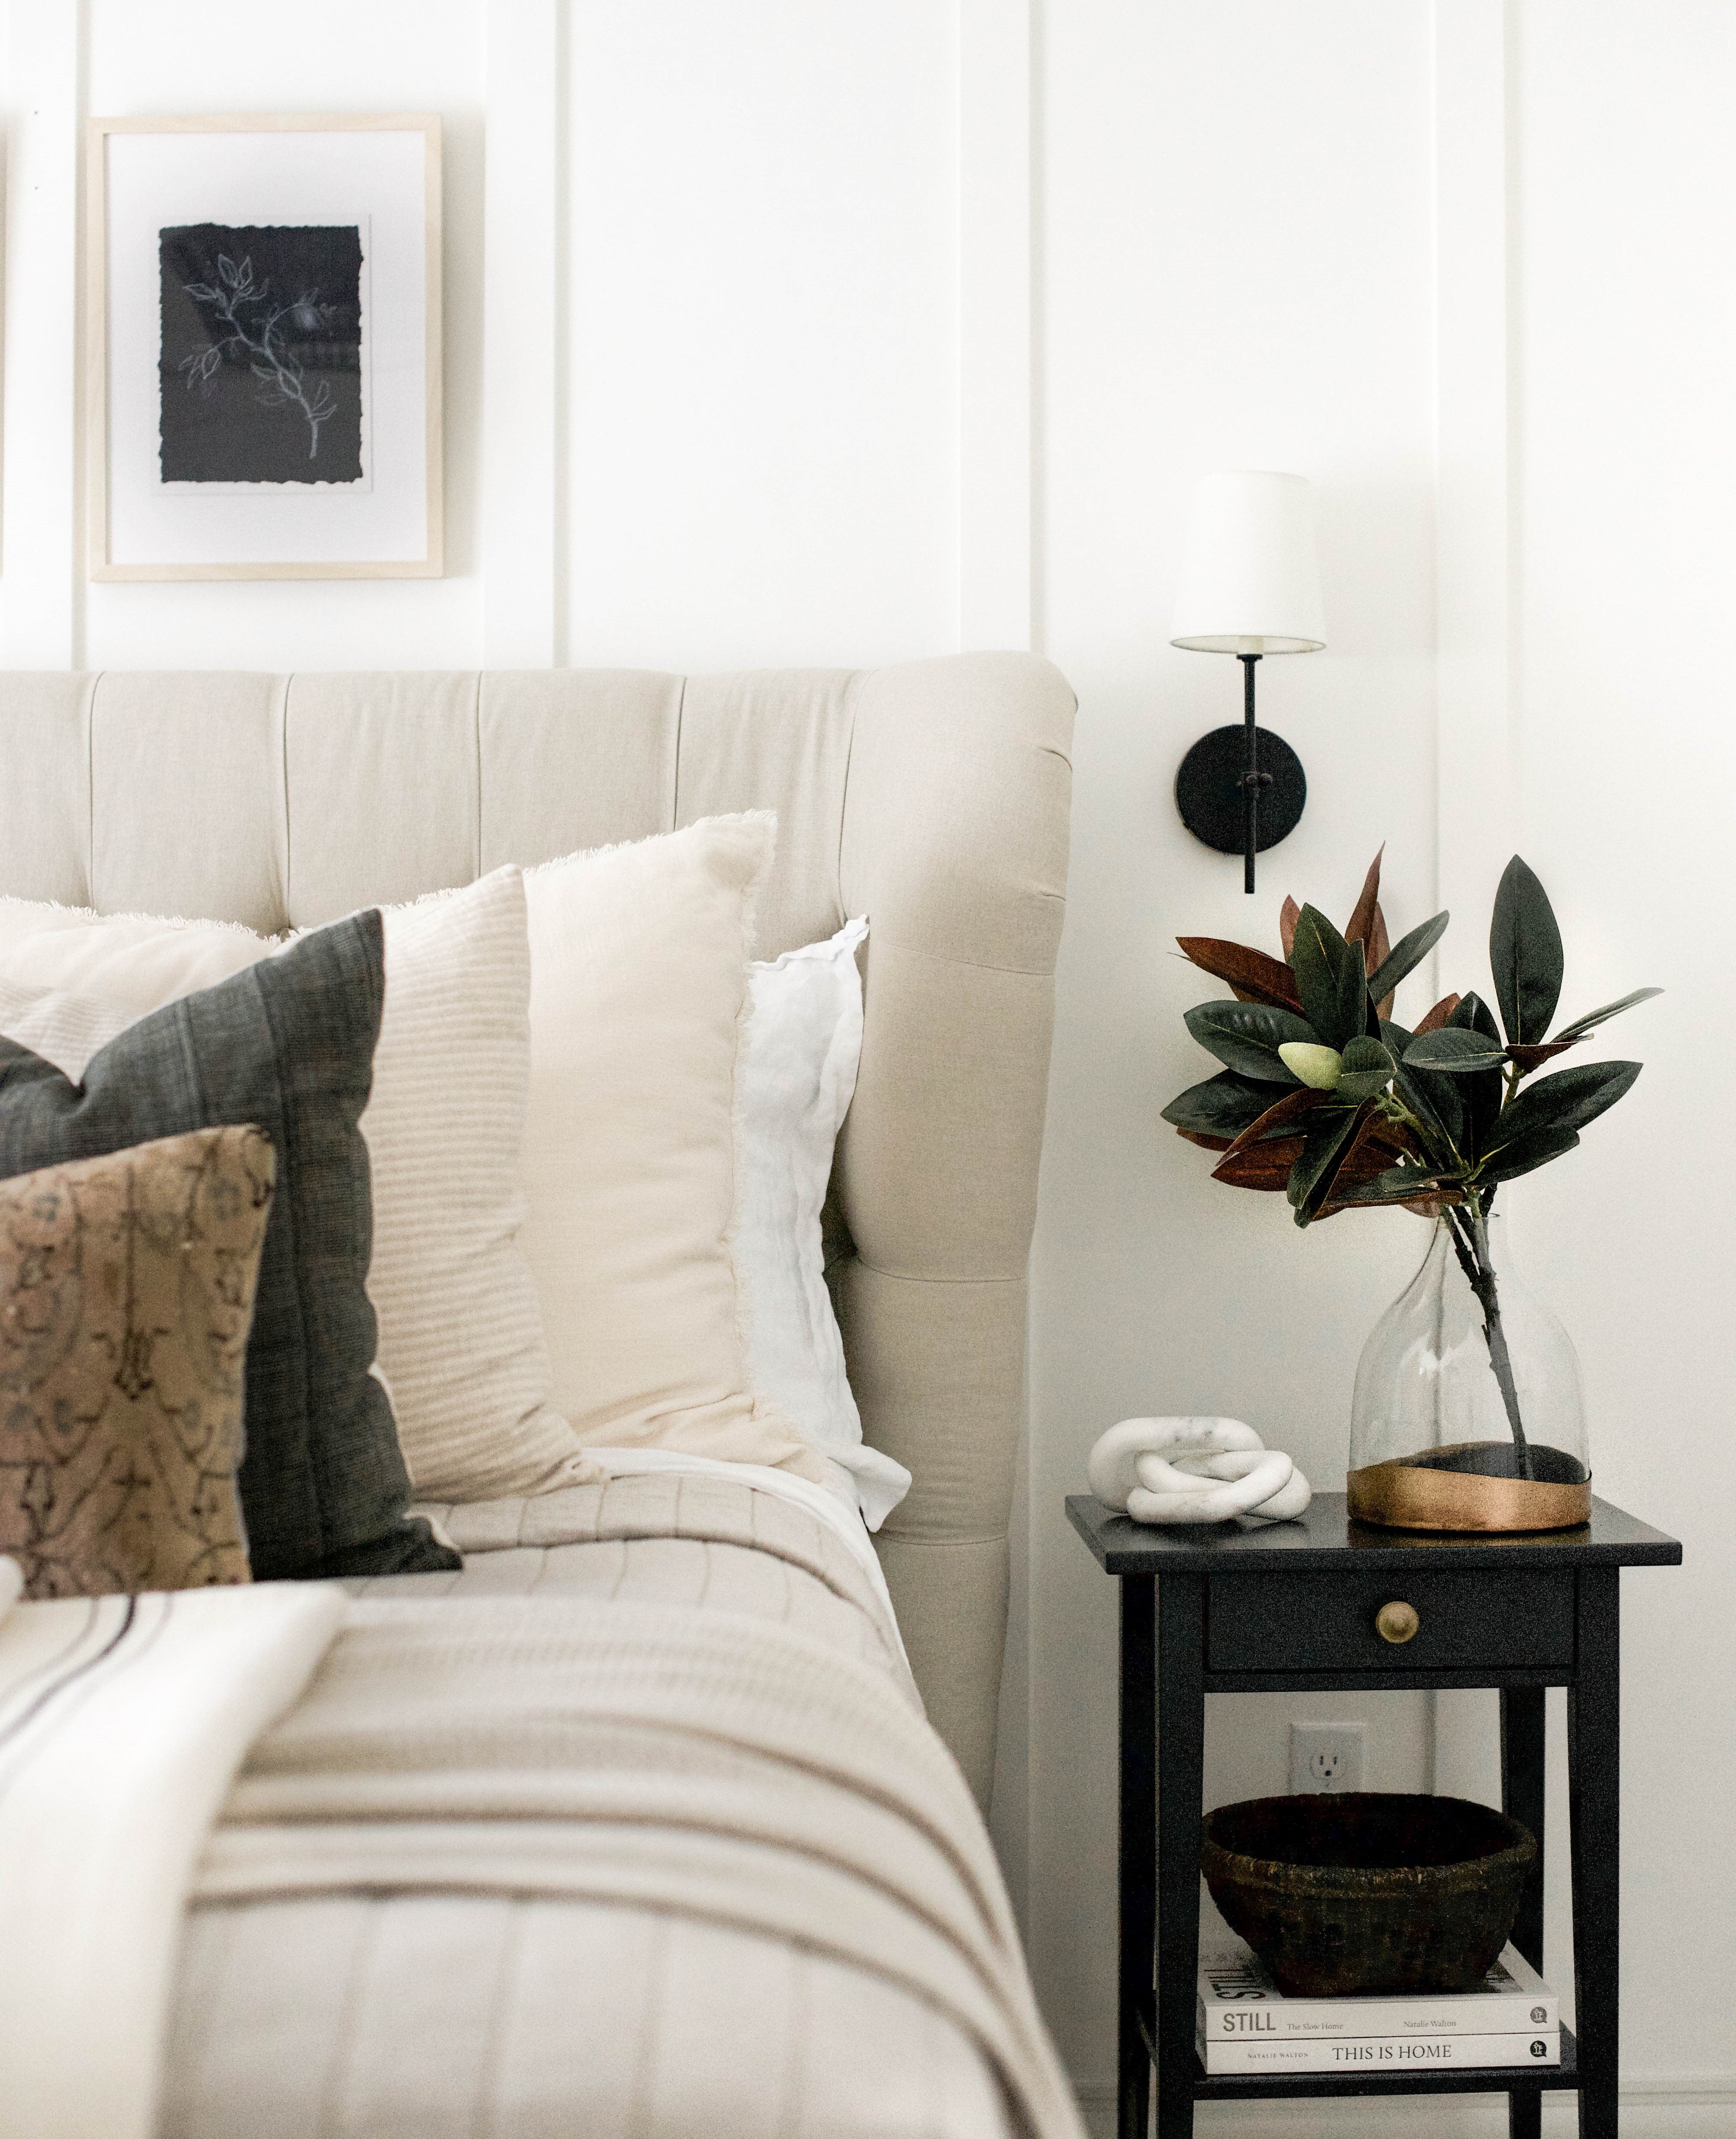 HOW TO MAKE YOUR BEDROOM COZIER FOR THE HOLIDAYS - HYGGE CAVE